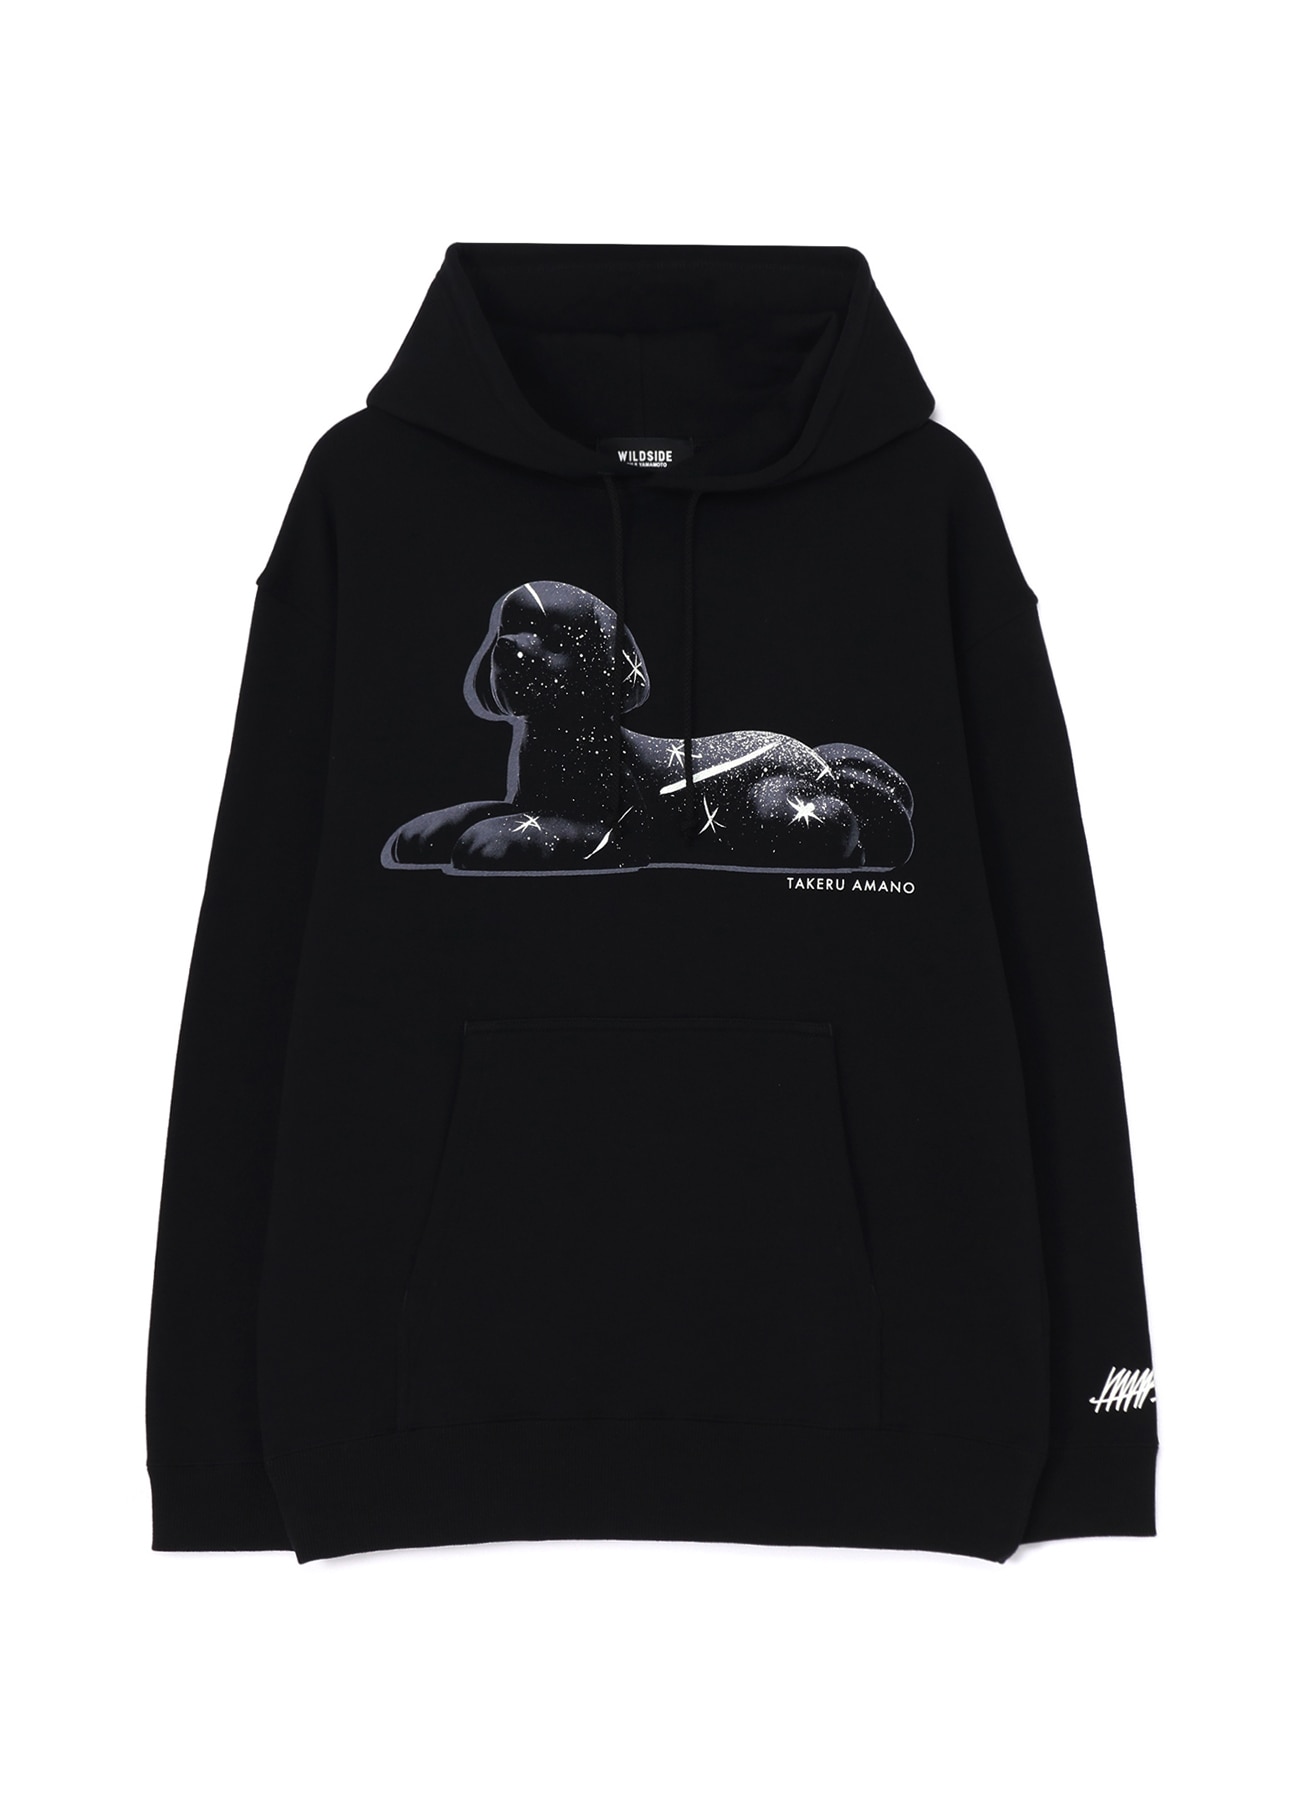 【4/17 12:00(JST) release】WILDSIDE×天野タケル Collaboration Hoodie